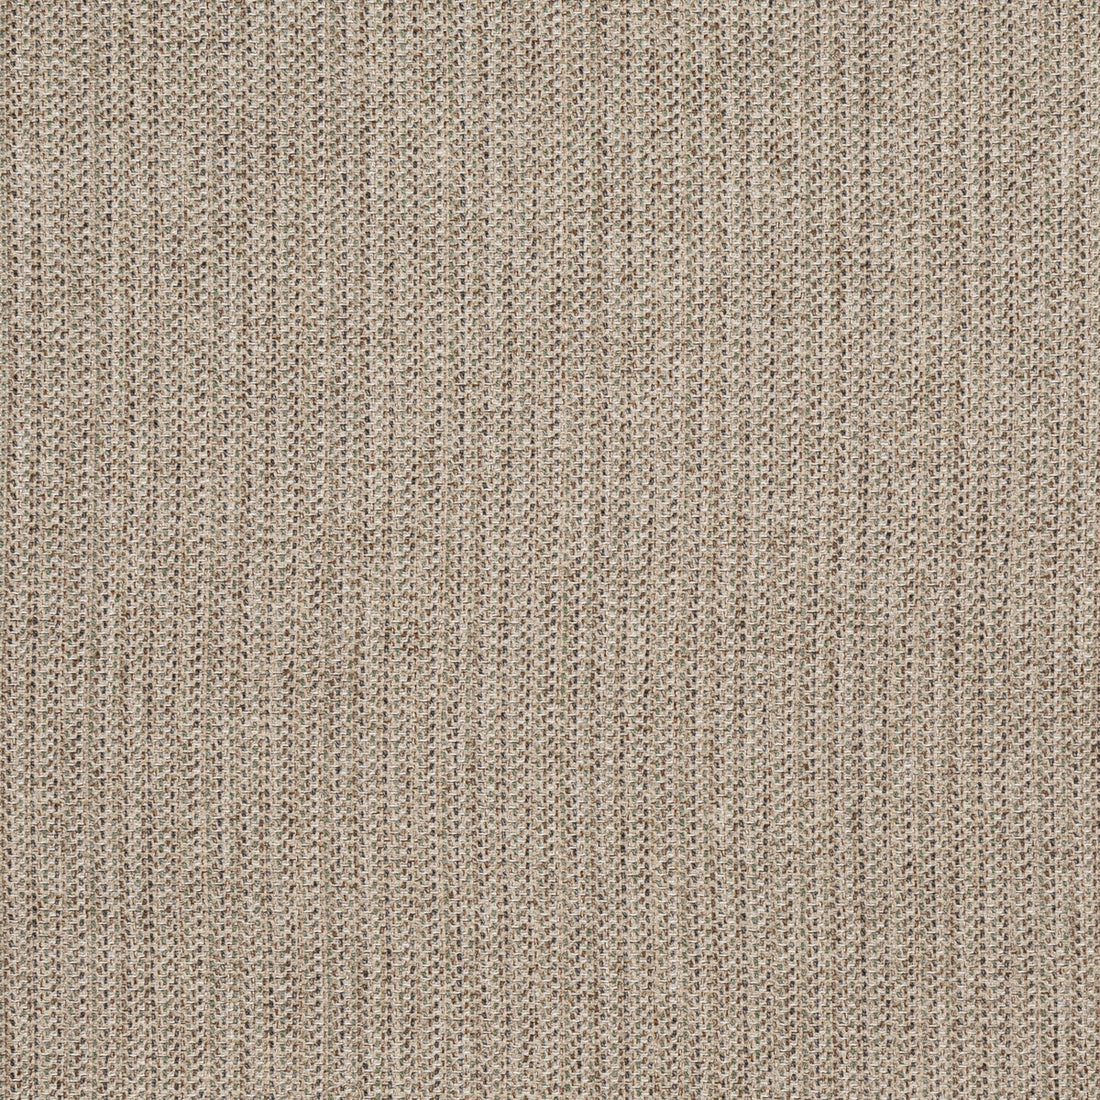 Casper fabric in sand color - pattern BFC-3712.1613.0 - by Lee Jofa in the Blithfield Eden collection